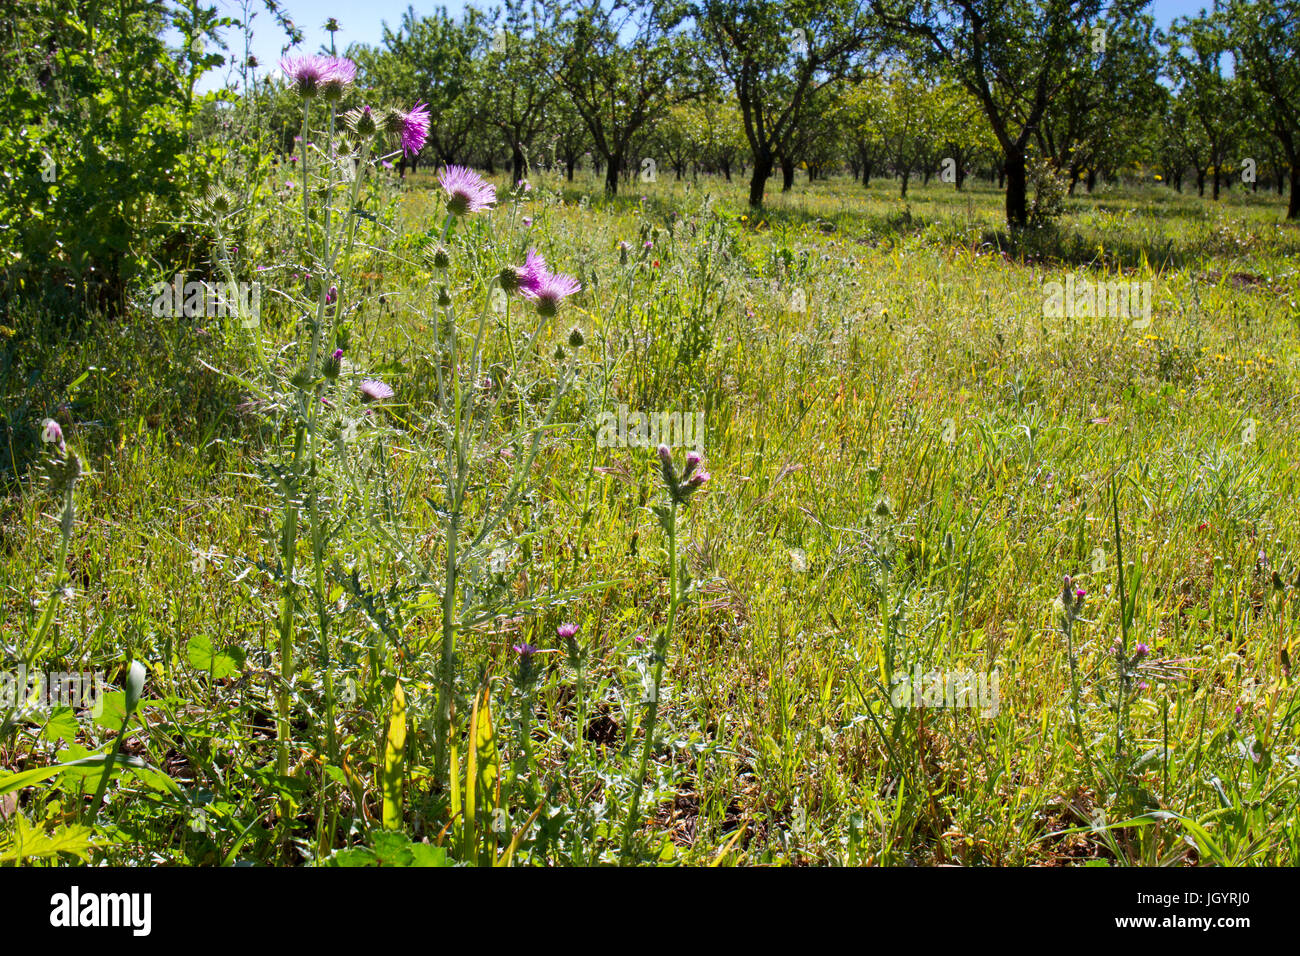 Purple Milk Thistle (Galactites tomentosa) flowering in an almond orchard. Near Mouries, Bouches-du-Rhône, France. May. Stock Photo